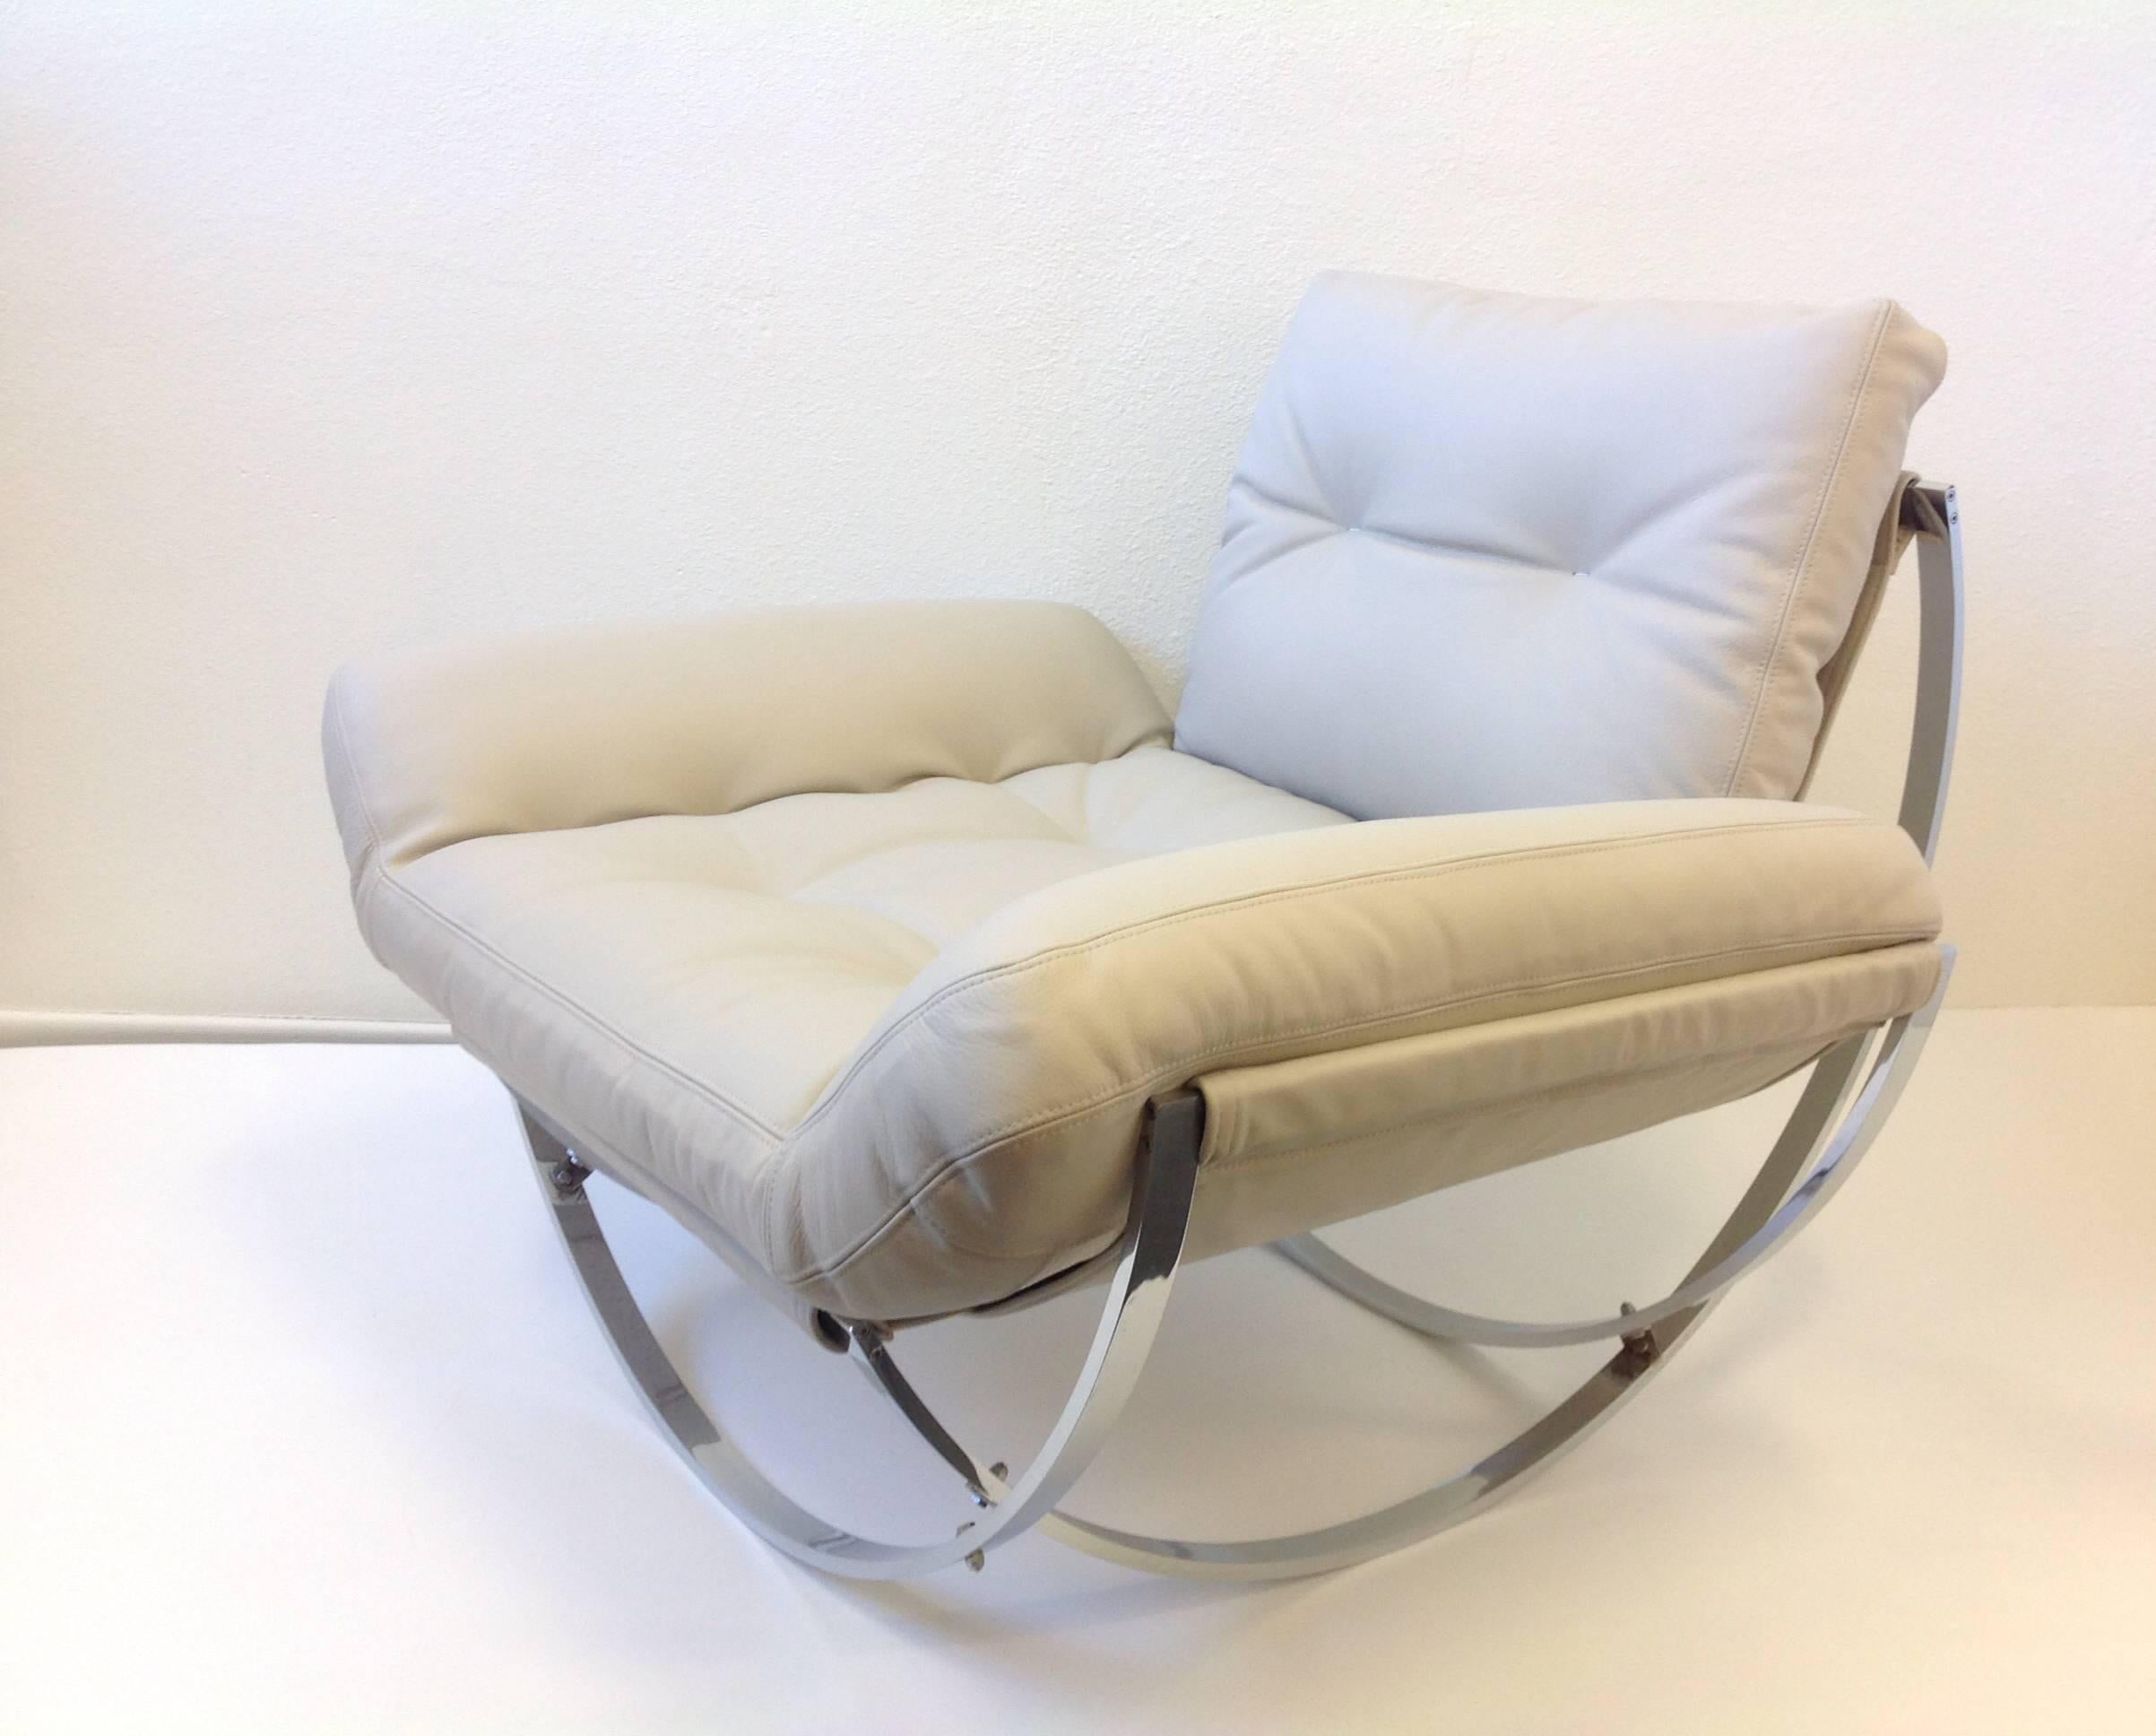 Late 20th Century Italian Polish Stainless Steel and Leather Lounge Chair and Ottoman